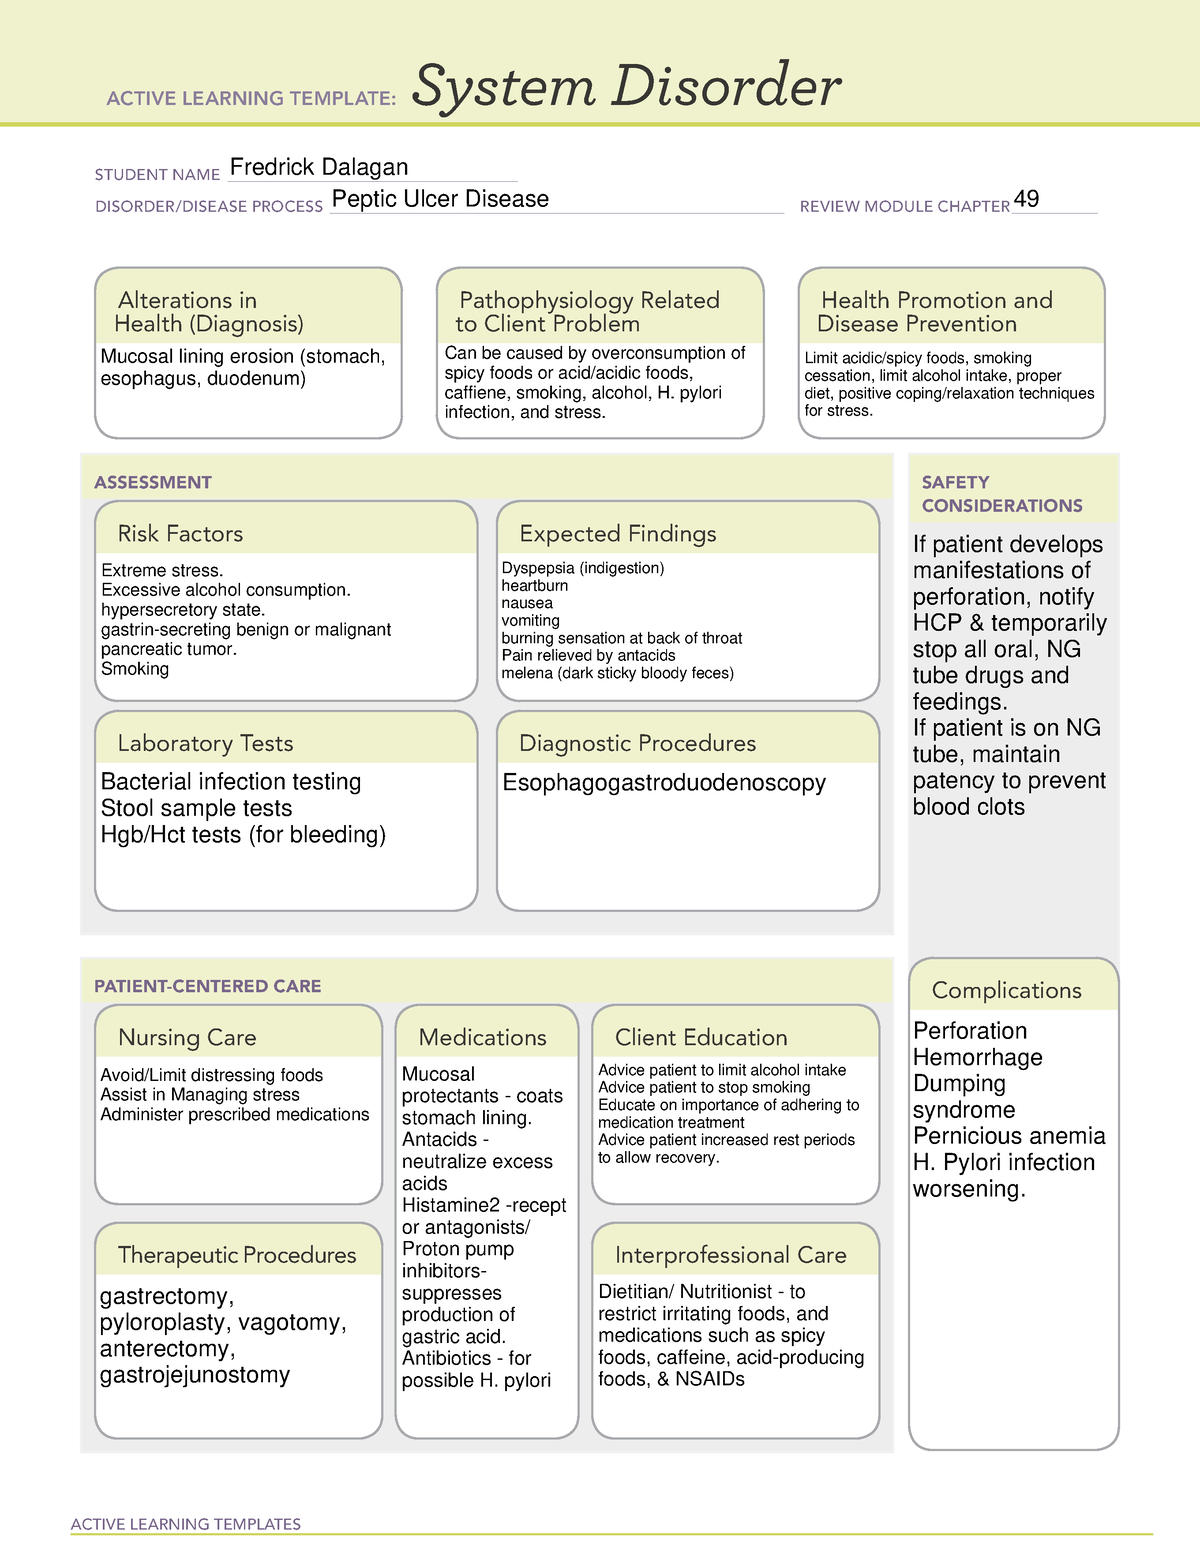 Peptic Ulcer Disease System Disorder Template ACTIVE LEARNING